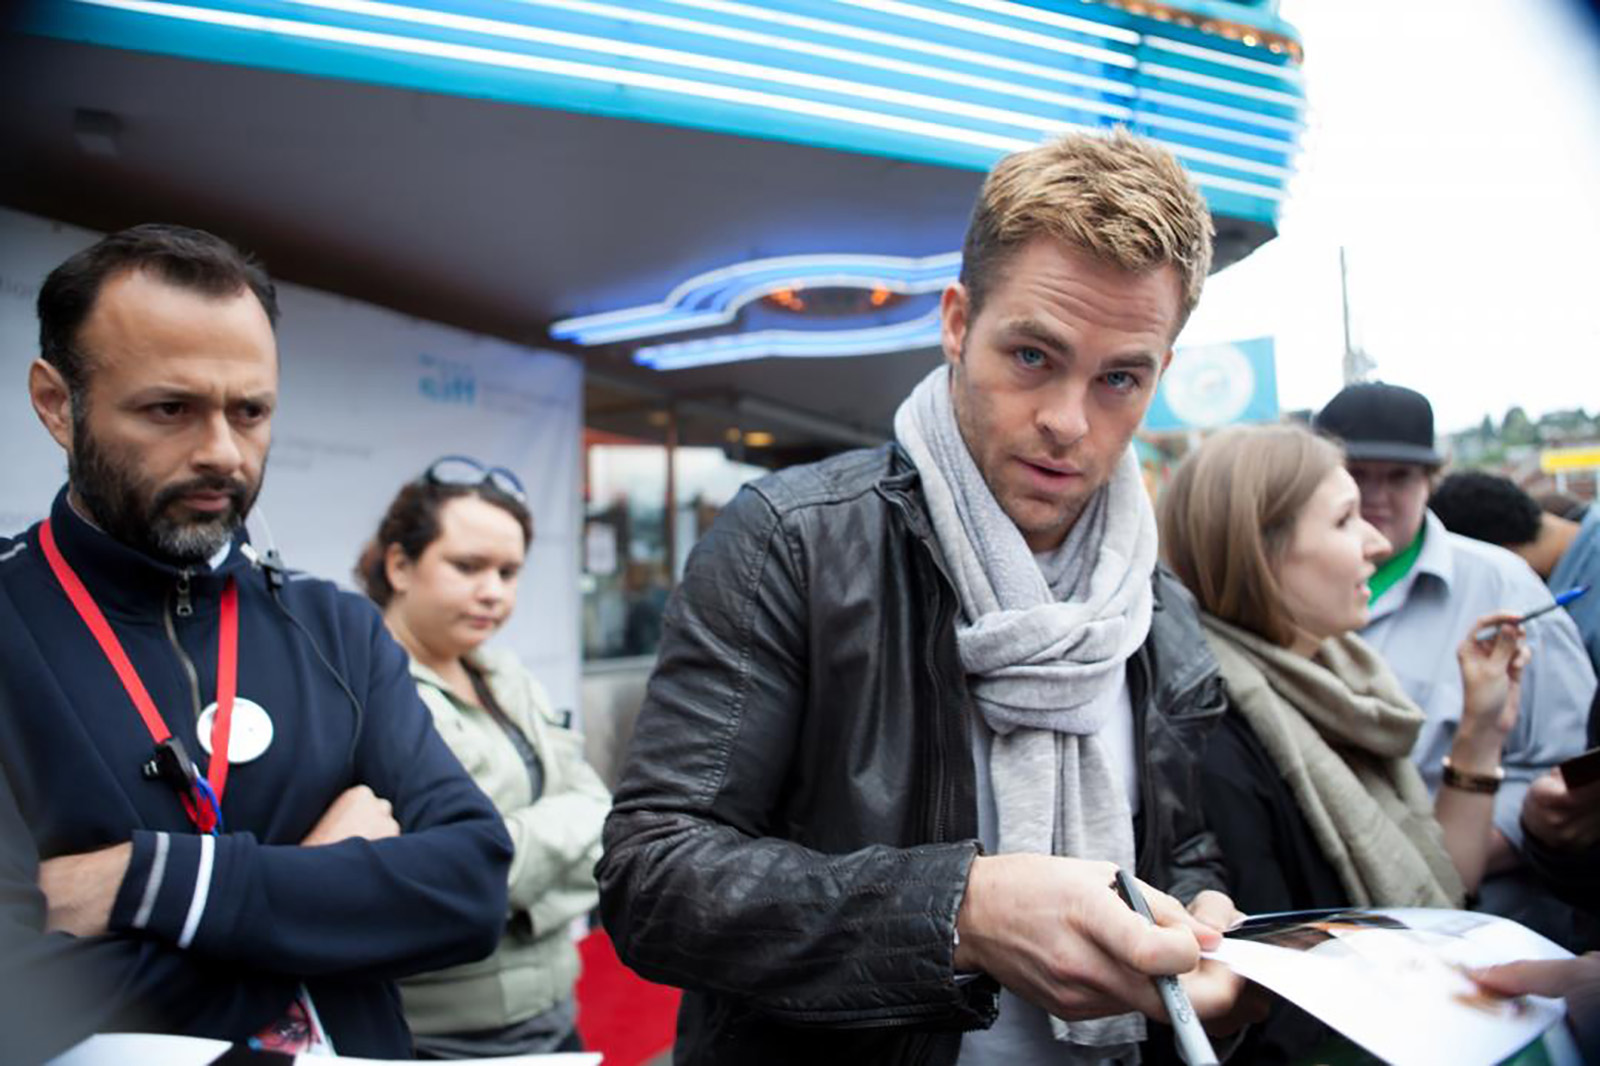 Actor, Chris Pine, in town for his film, People Like Us, looks up from signing autographs outside SIFF Cinema Uptown